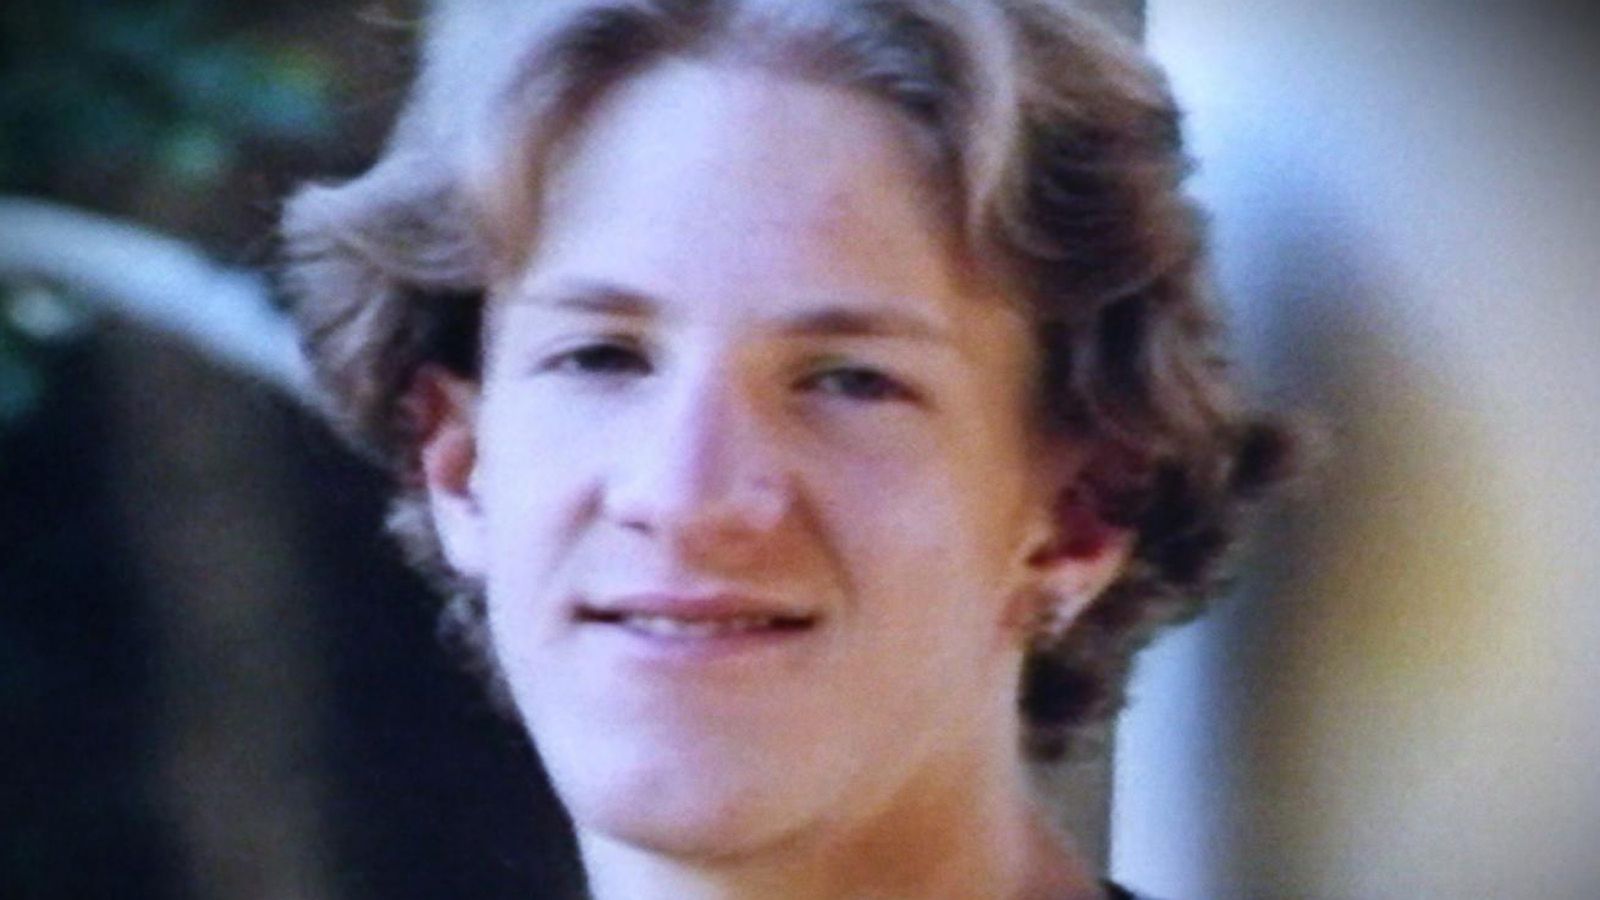 What Happened to Dylan Klebold Over Time: Part 3